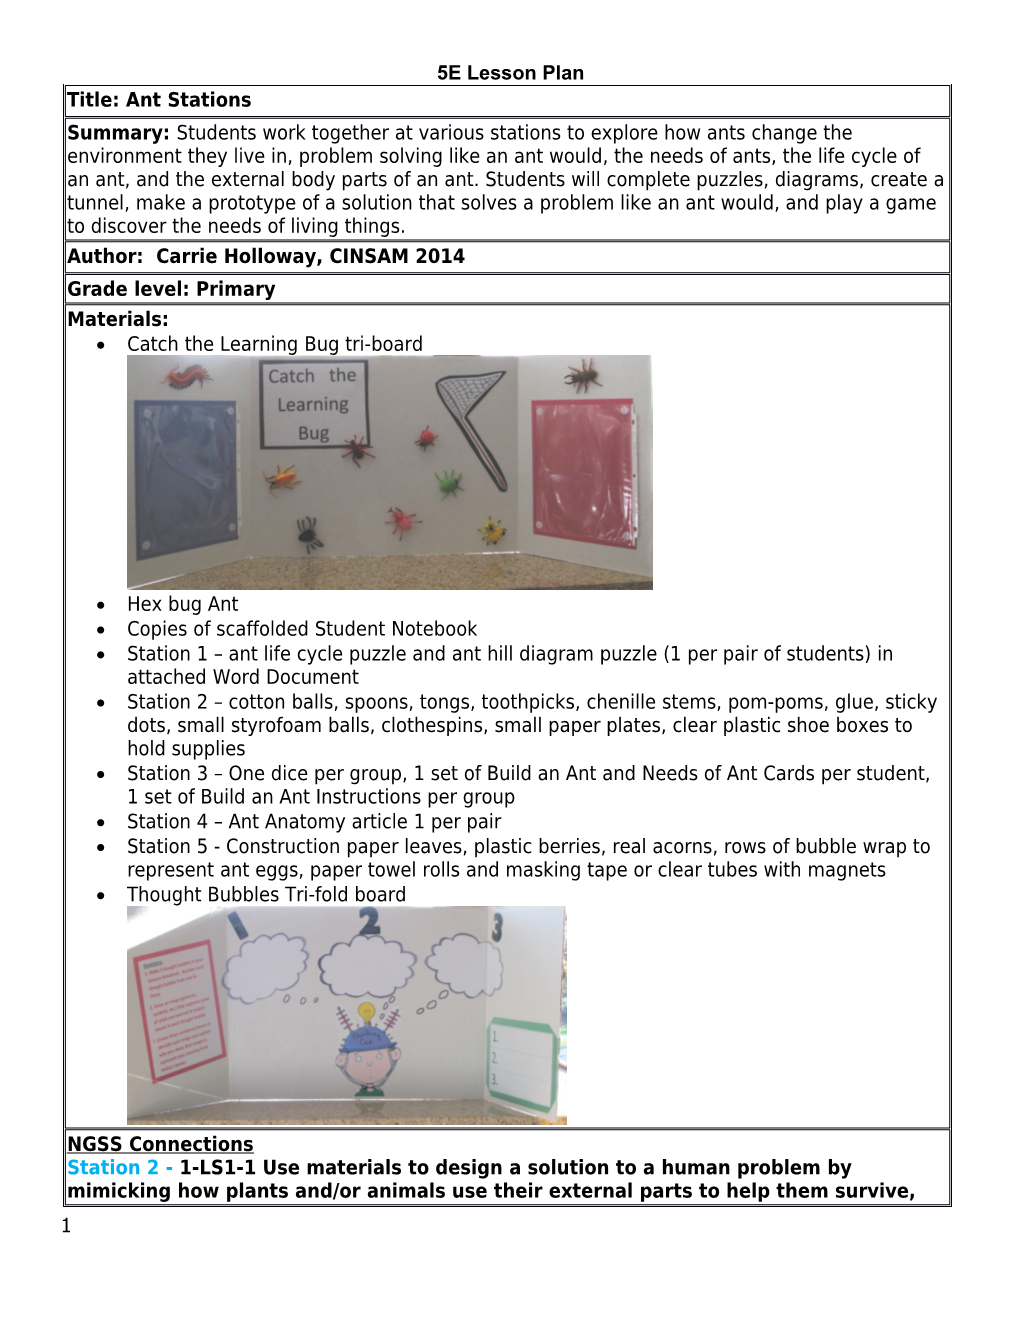 5E Student Lesson Planning Template s4